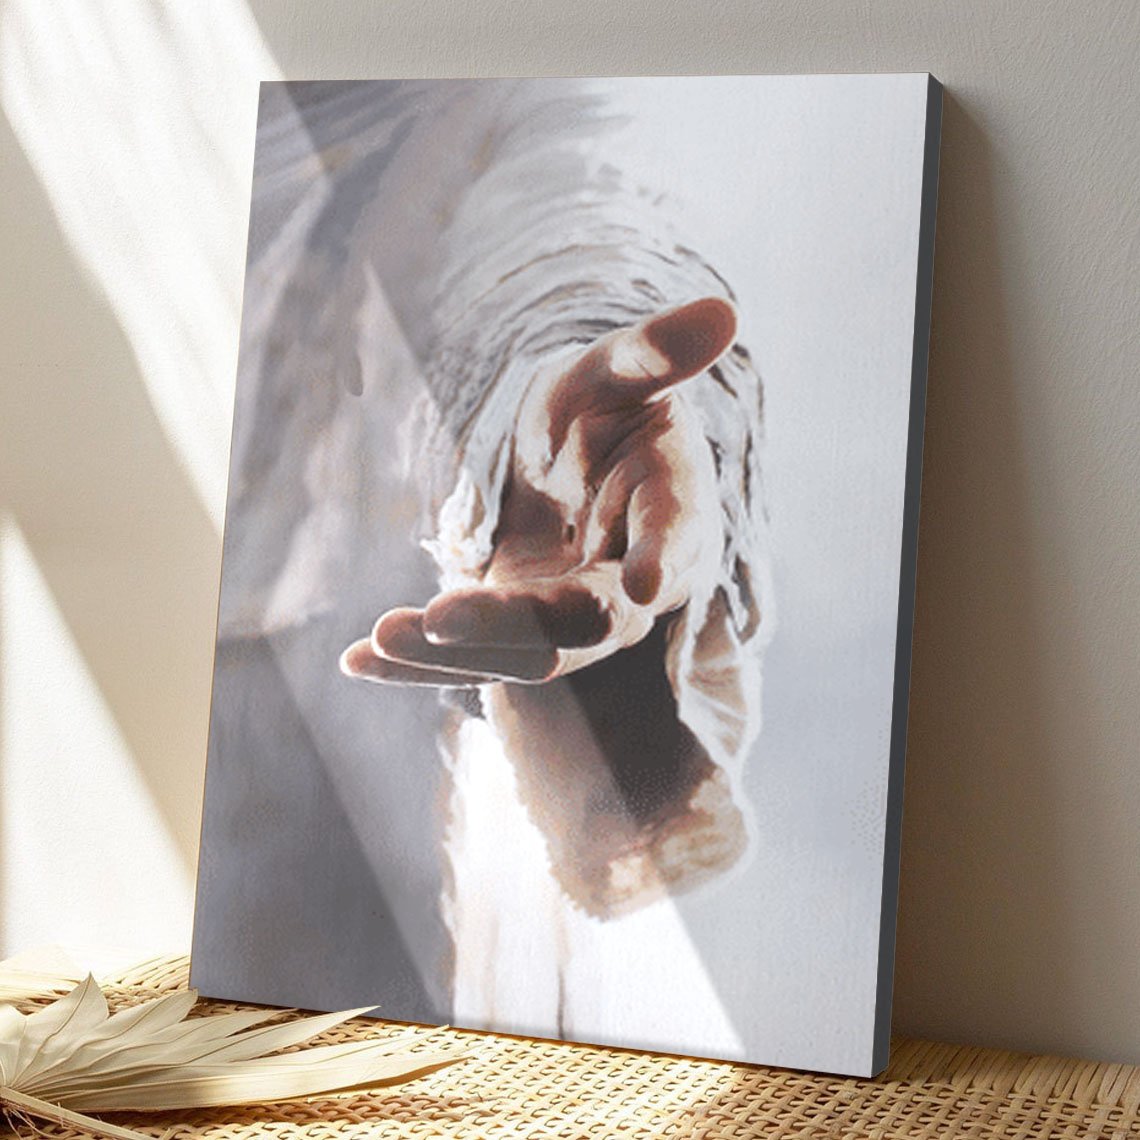 The Hand Of God Canvas Prints - Poster Printing - Wall Art - Jesus Gives His Hand - Ciaocustom